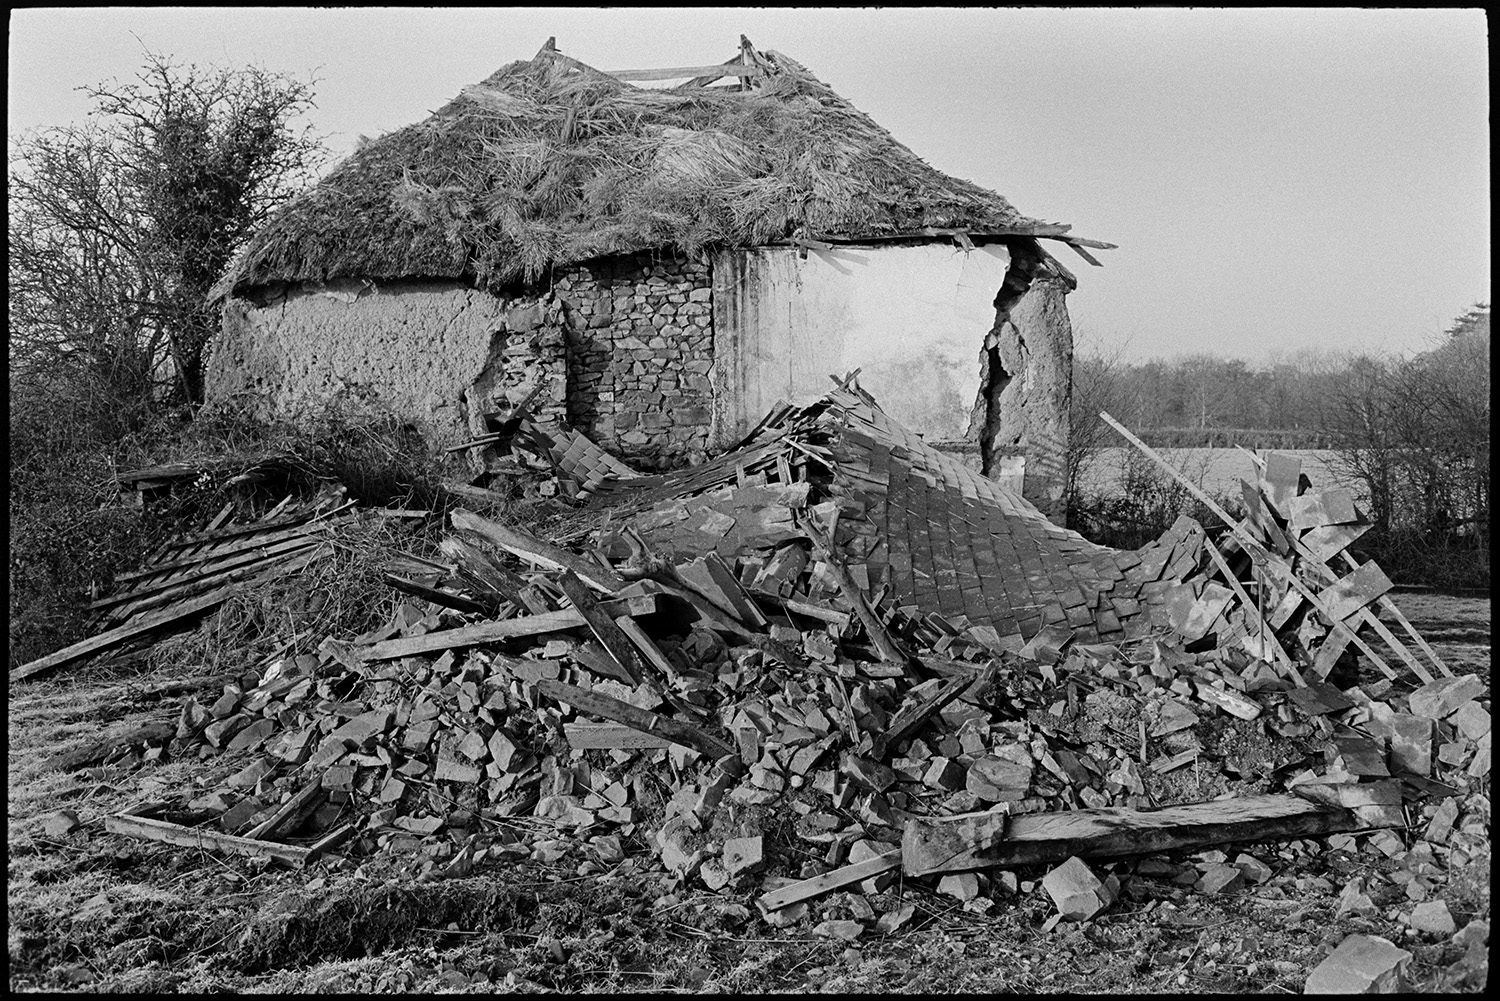 Ruined thatch and cob barns, with views from nearby stream, trees.
[A ruined cob and thatch barn in a field at Middle Week, Iddesleigh, behind a pile of rubble including slates and timber.]